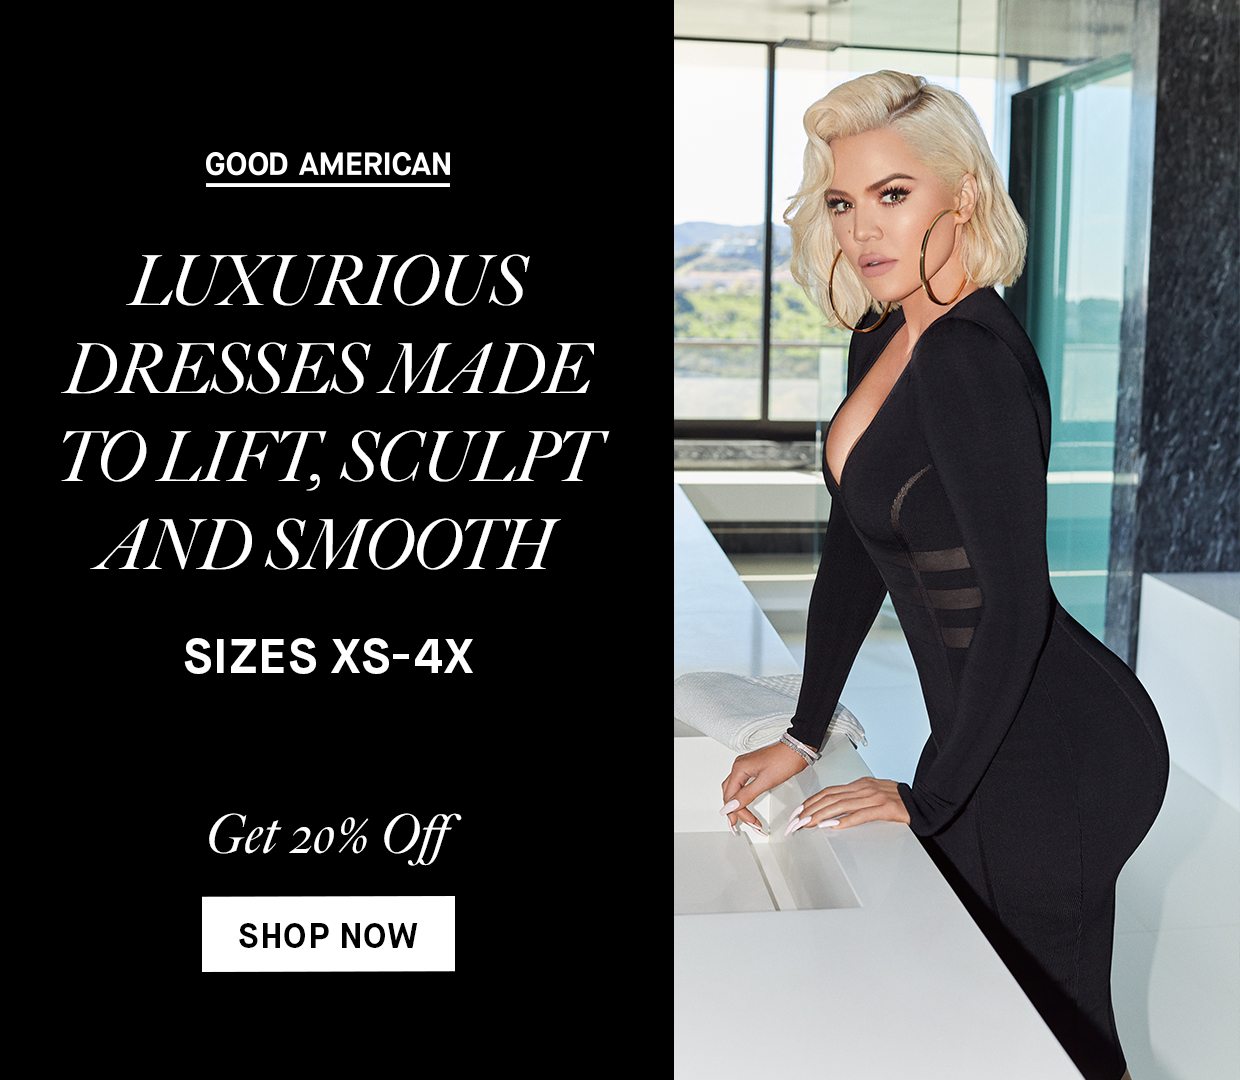 Take 20% off Good American's collection of luxurious dresses made to lift, sculpt and smooth; available in sizes XS-4X. Shop Now!